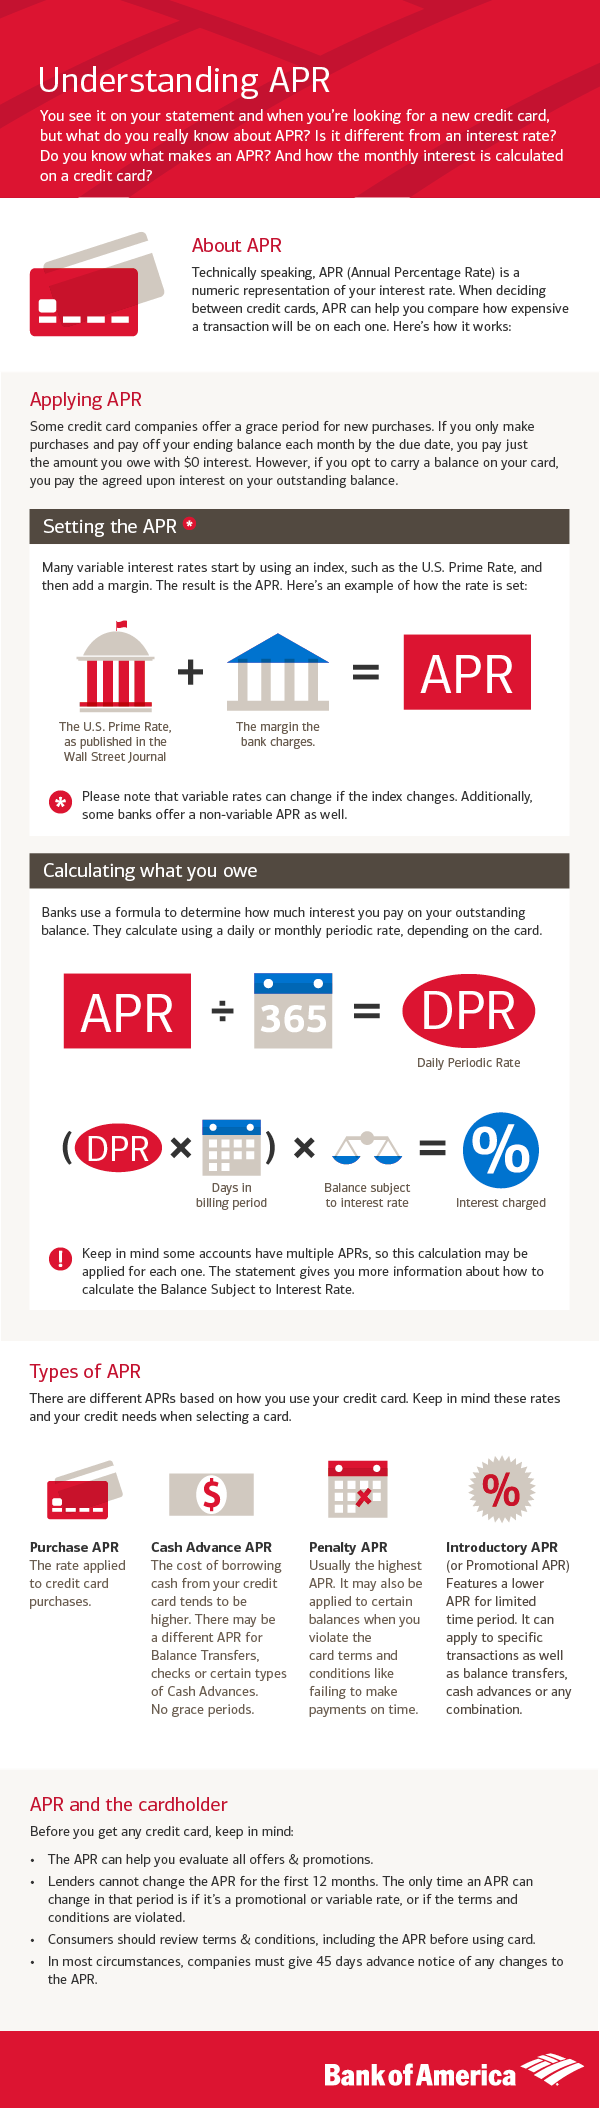 What is an APR? Credit Card APR Answers from Bank of America